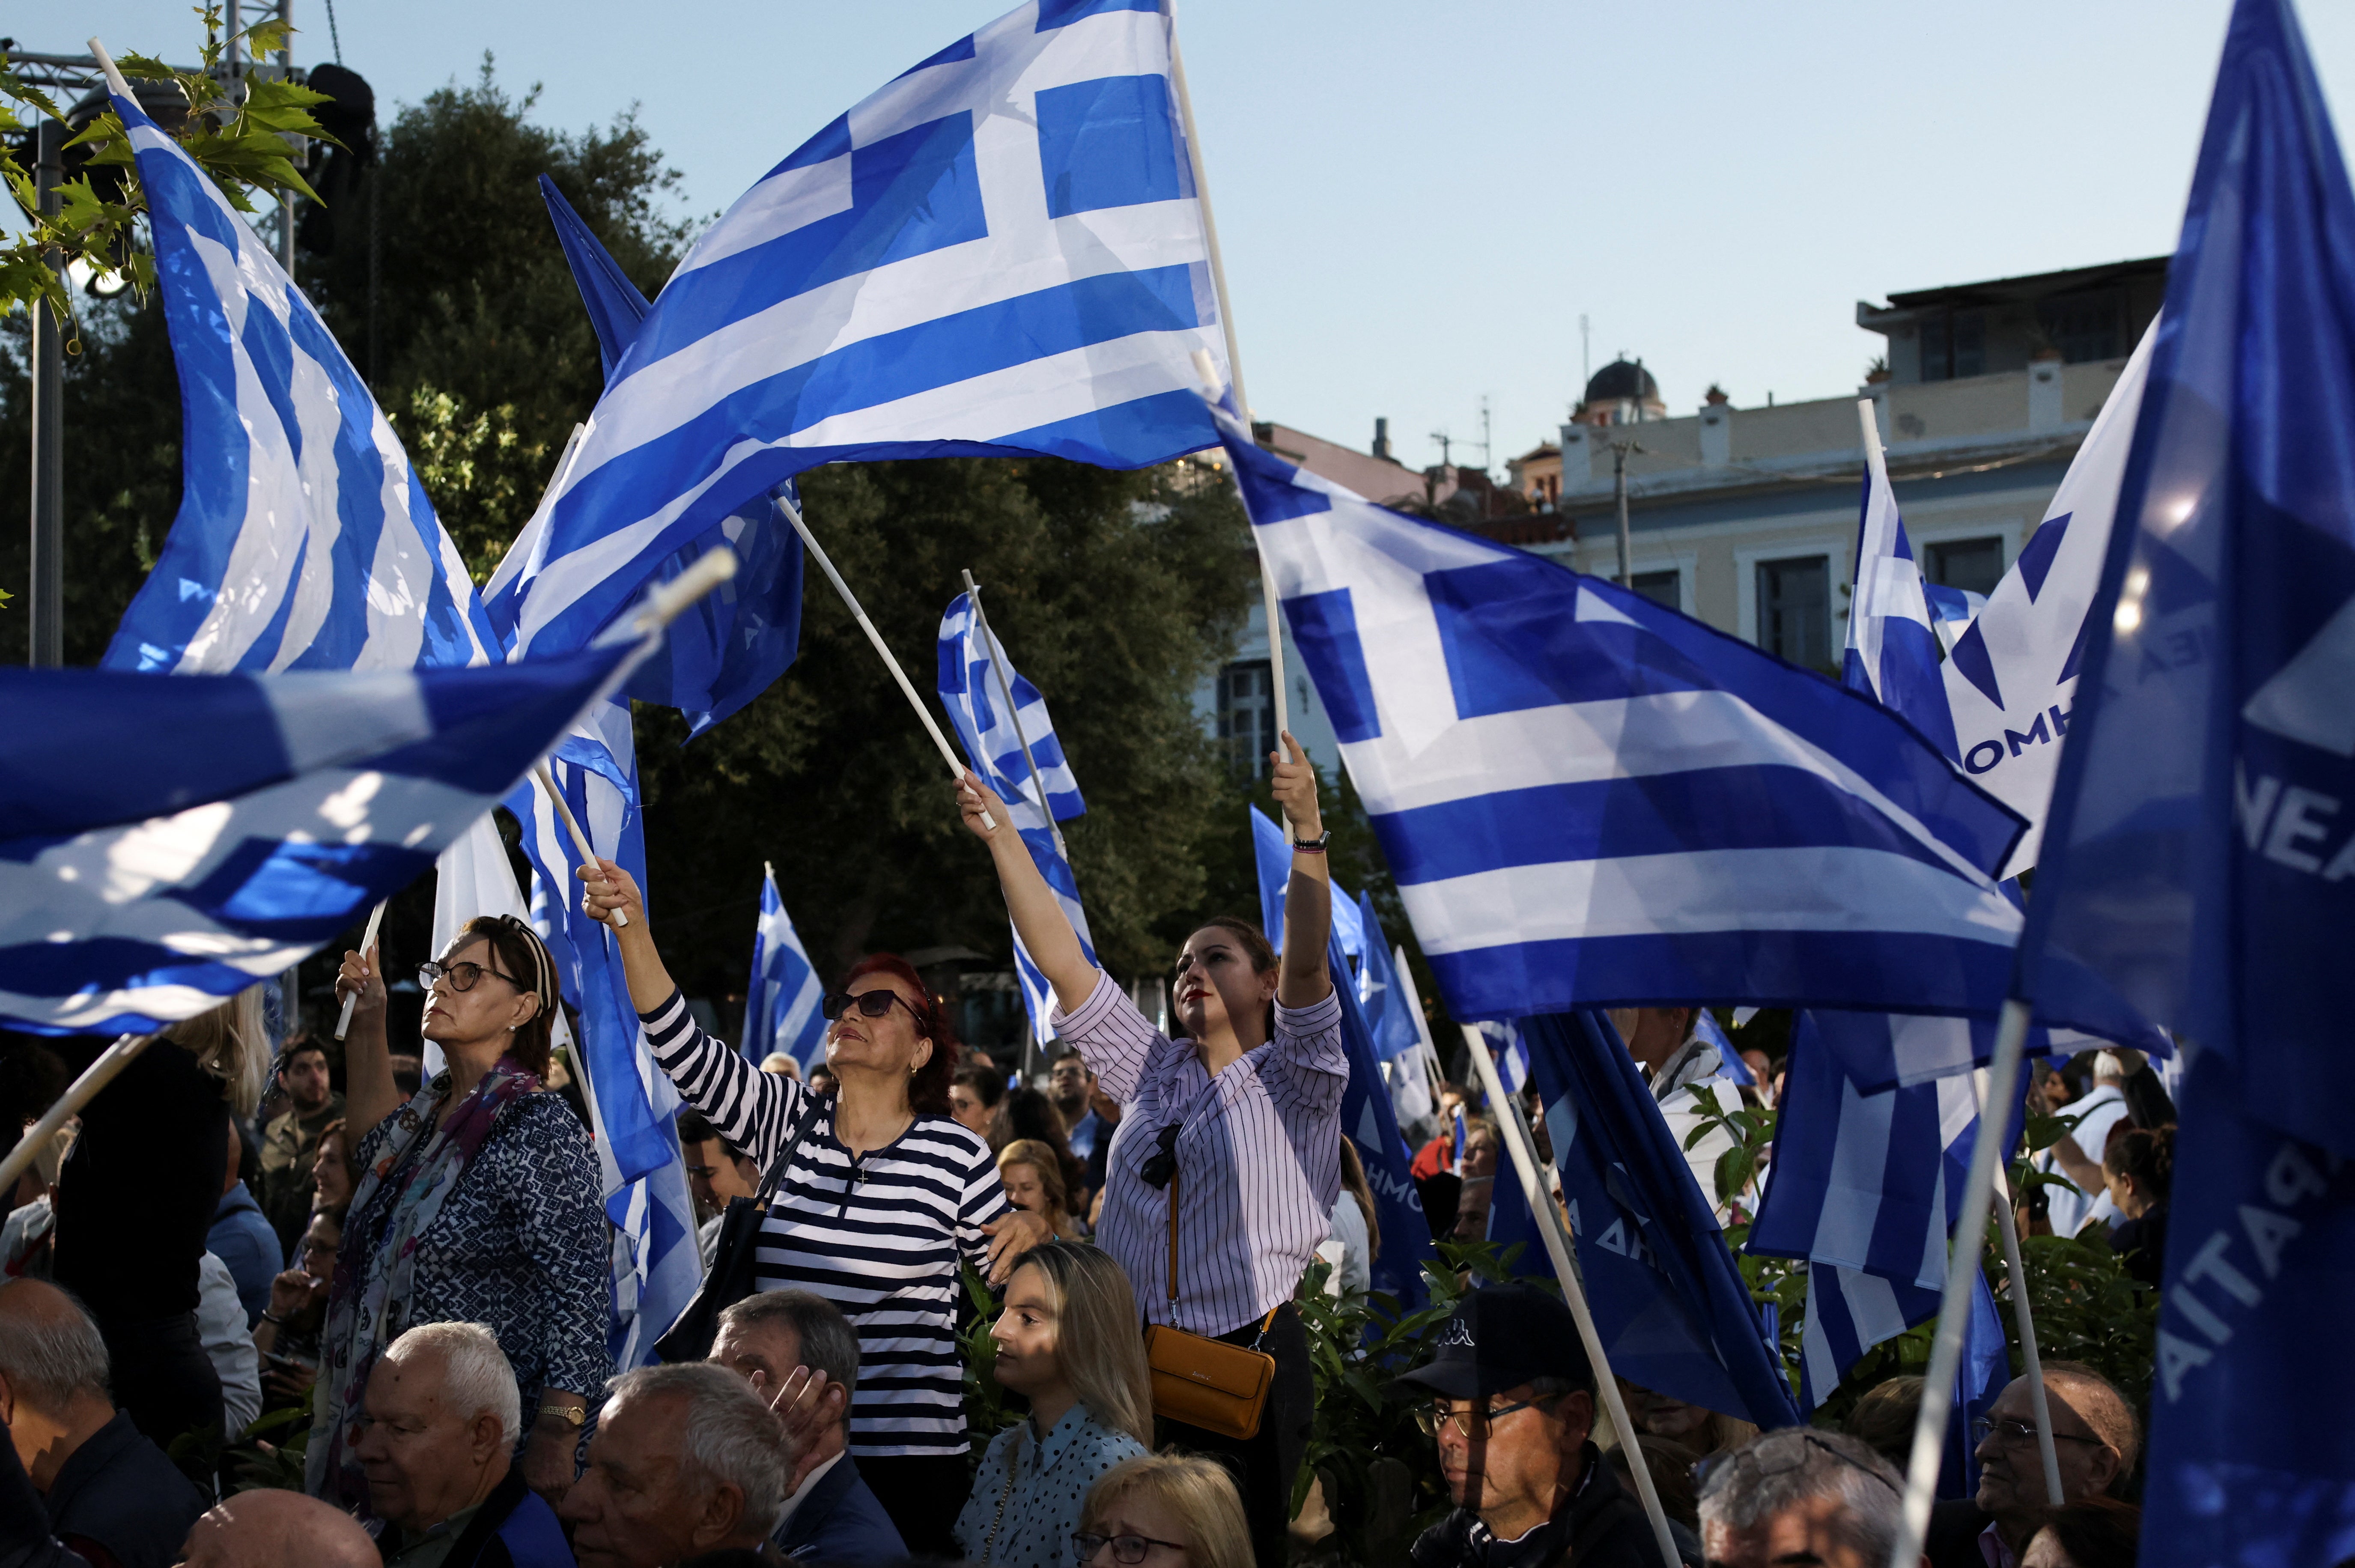 Greece election: Economy, migration, scandals loom large in pivotal vote